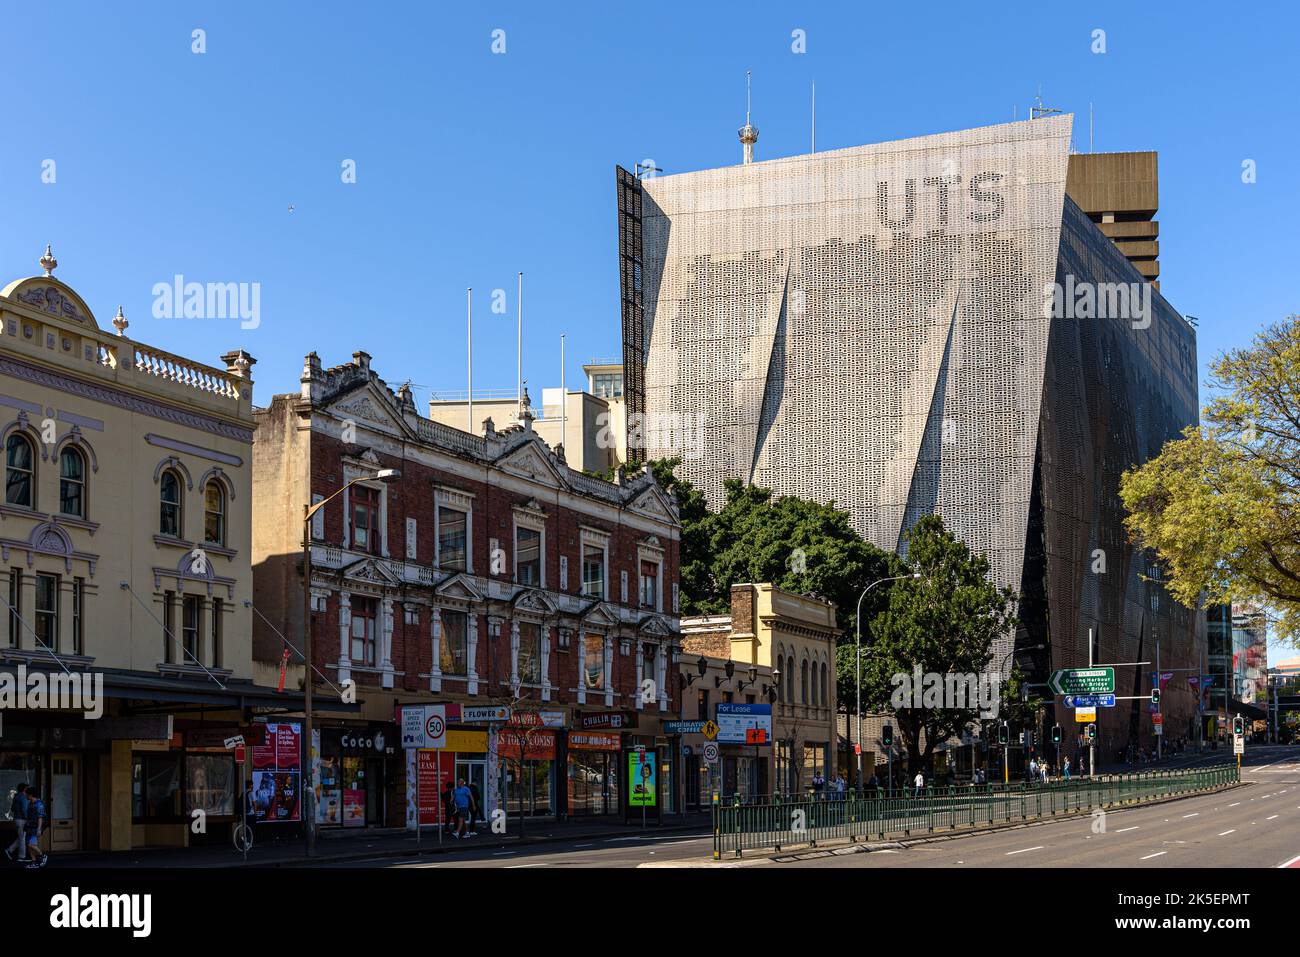 The UTS Data Arena at the University of Technology Sydney as seen from Broadway Stock Photo